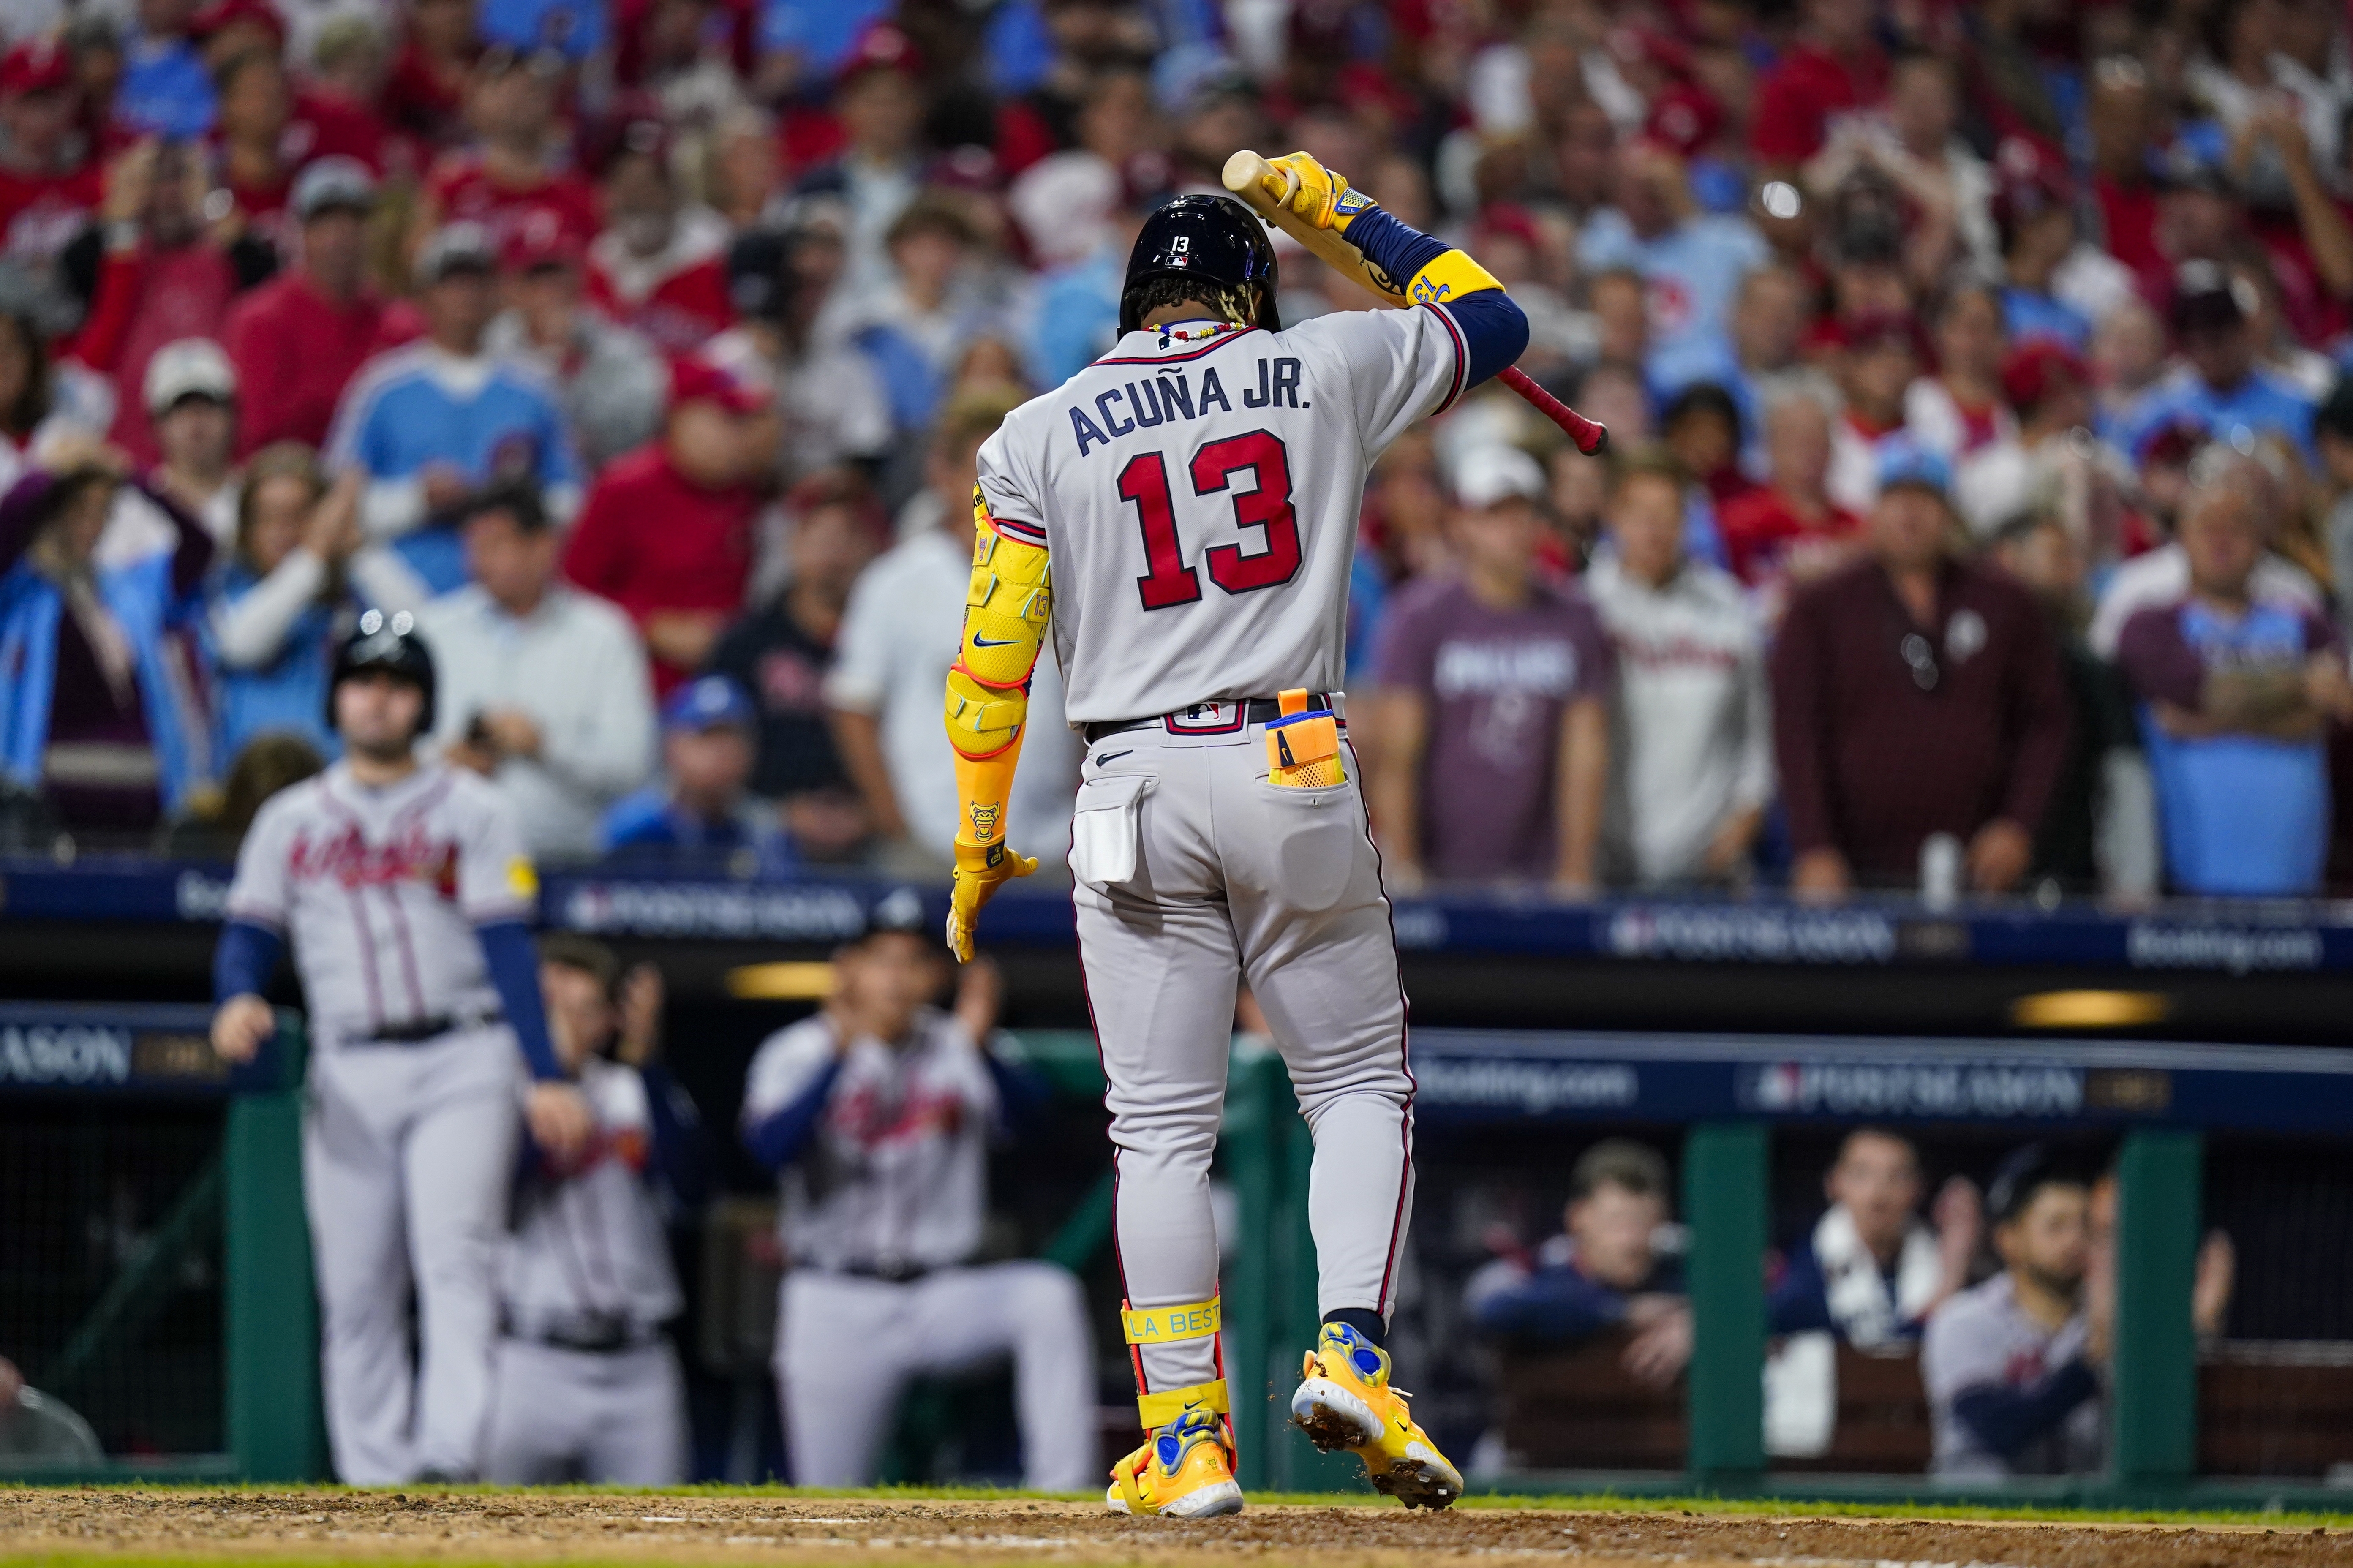 Marcell Ozuna (3 HRs), Braves overpower Red Sox - The Boston Globe